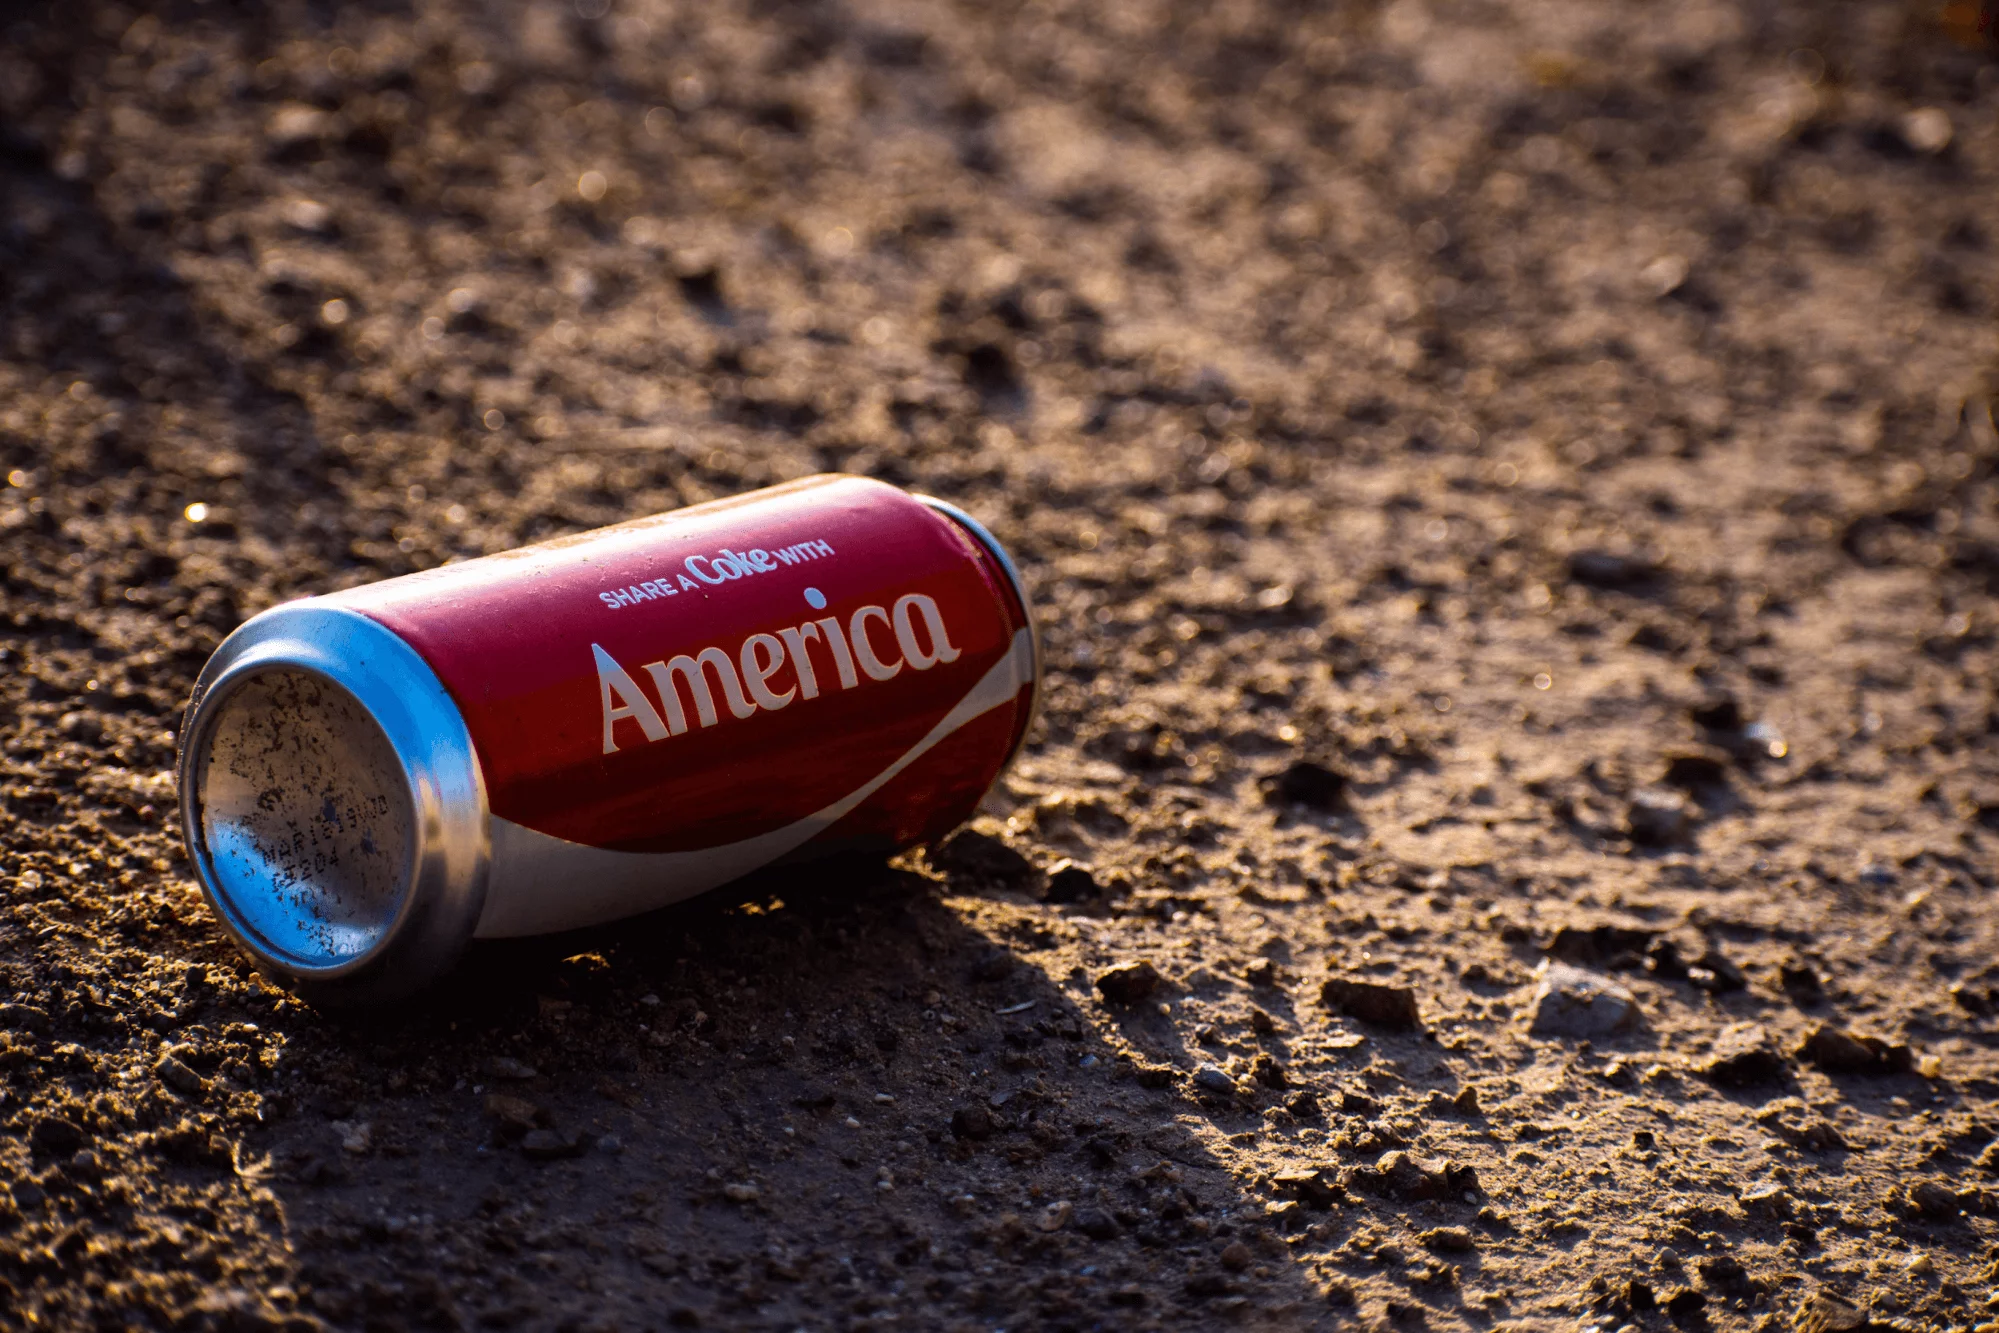 Photo of a Coke can with the campaign message "Share a Coke with America".